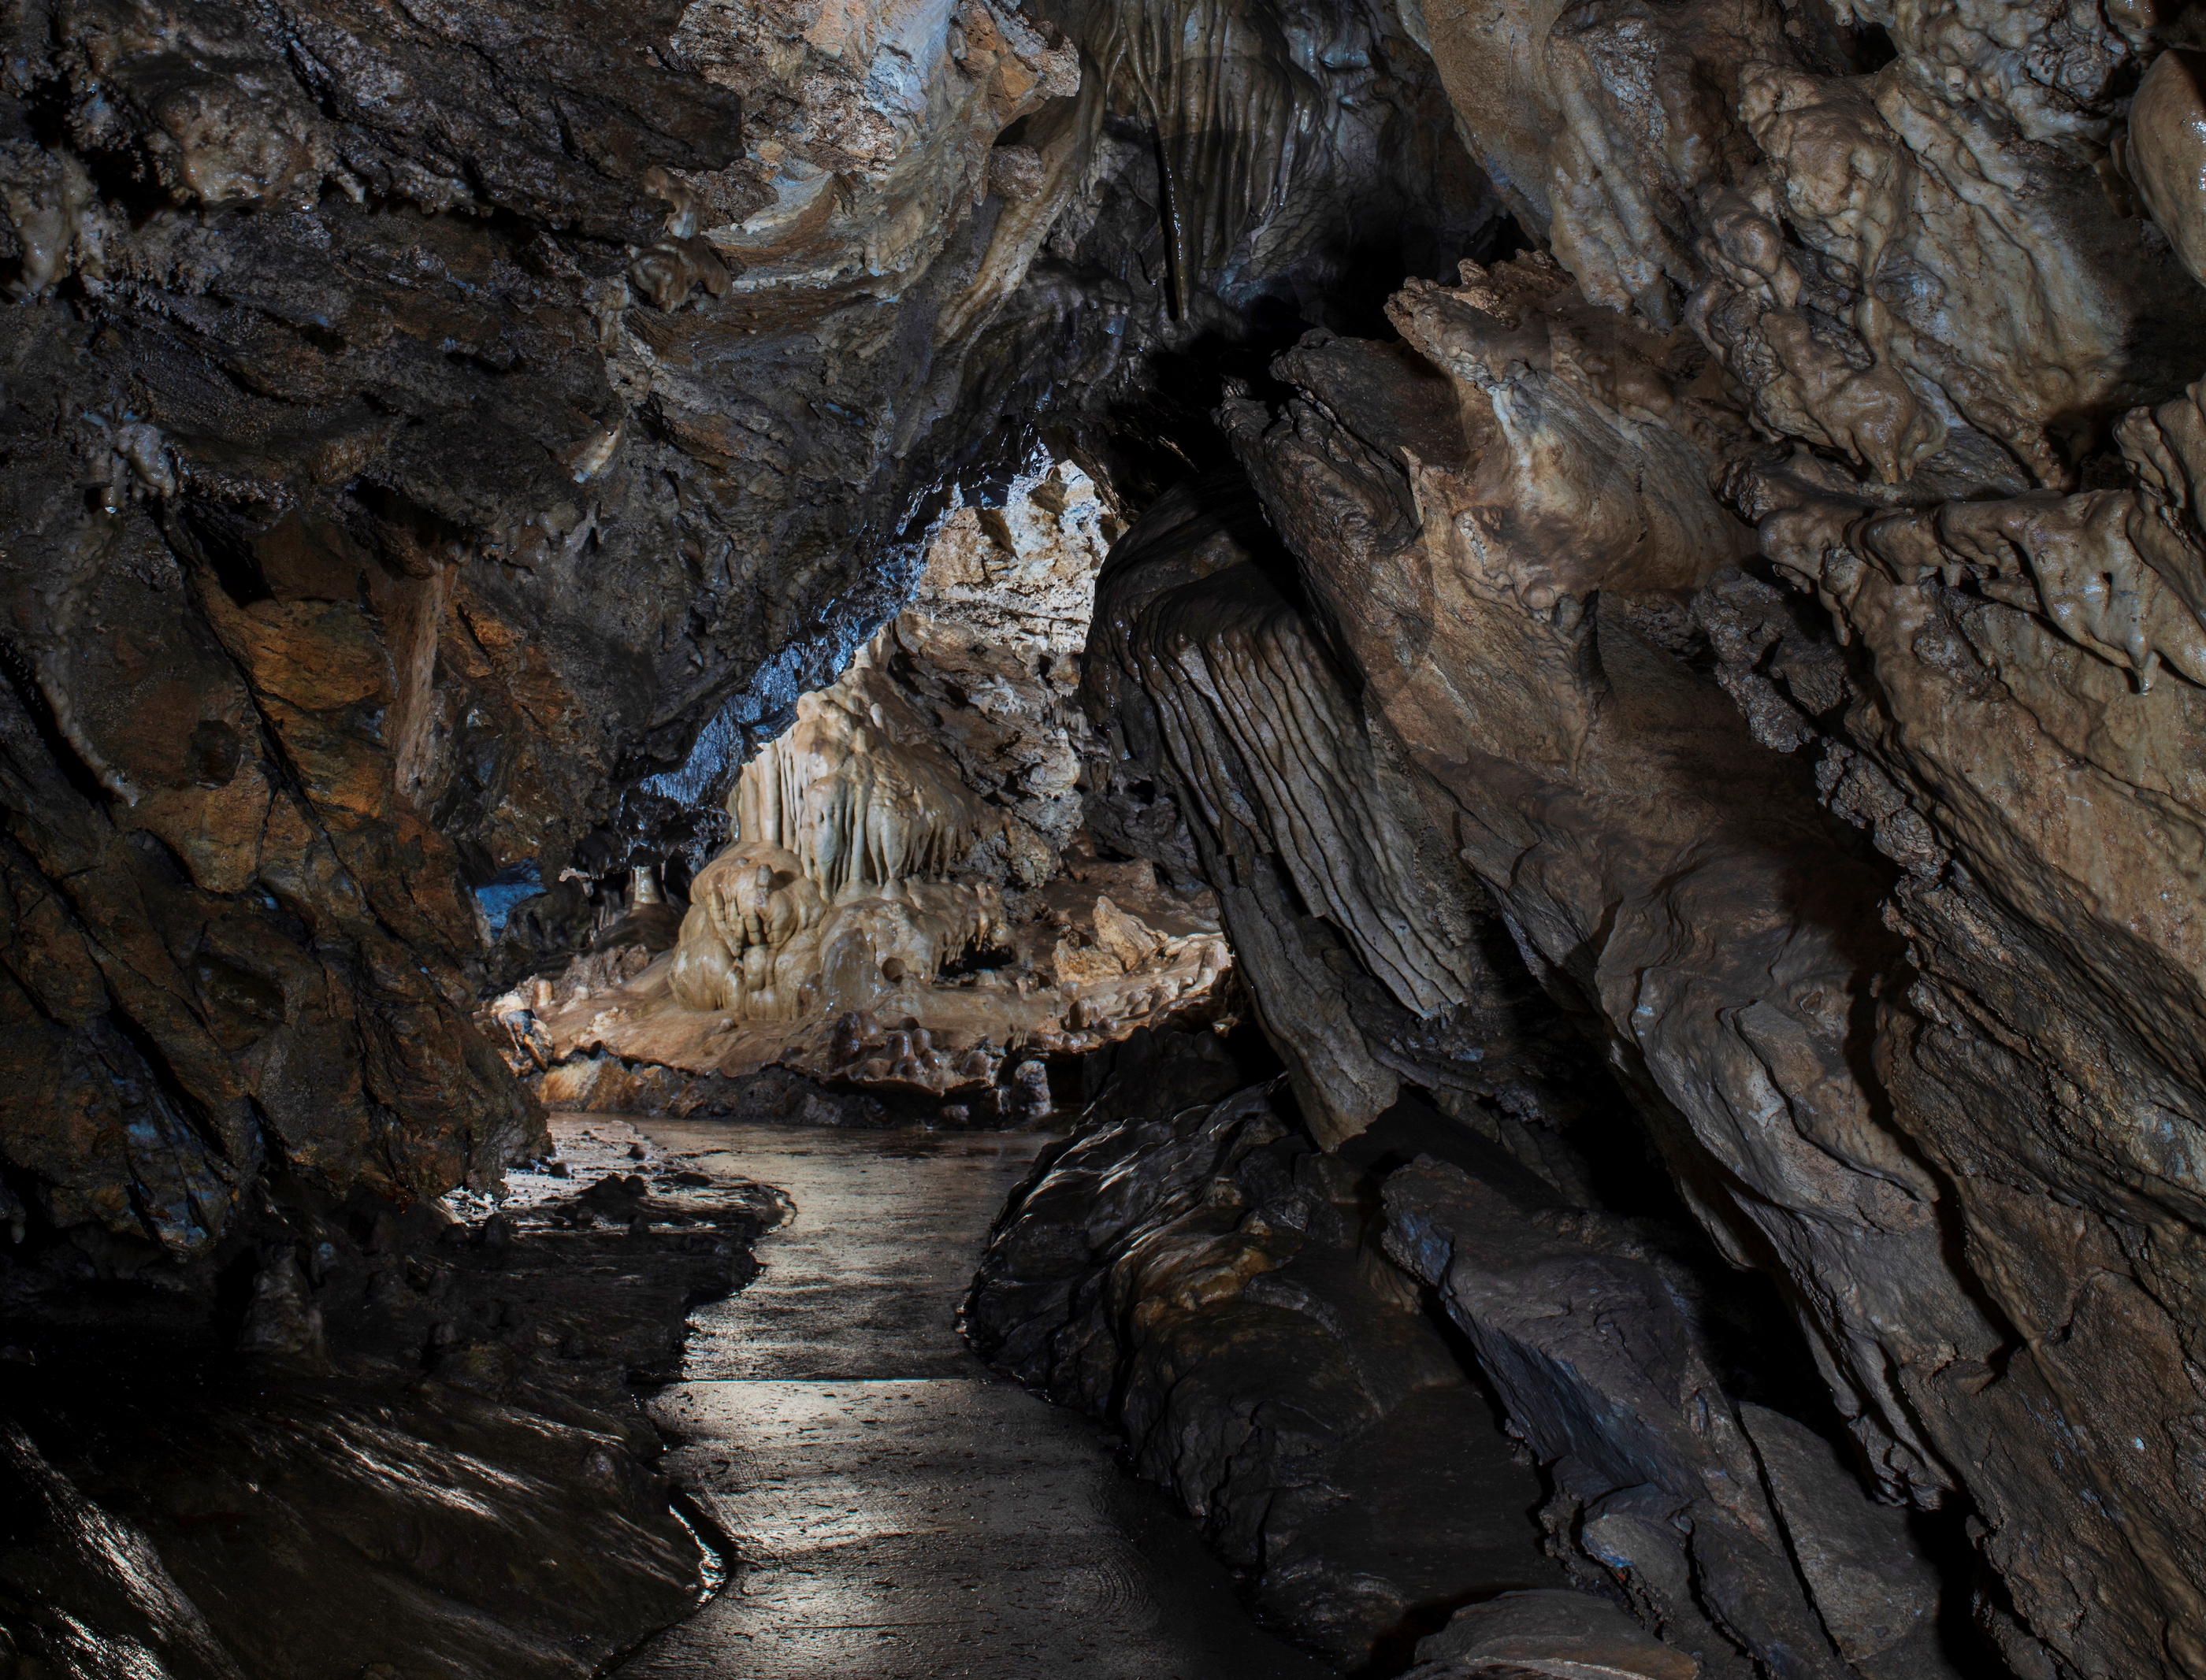 oregon caves, outdoor adventure, hiking, things to do, medford, guides and tours, cavern tours, marble halls, family friendly, national monument